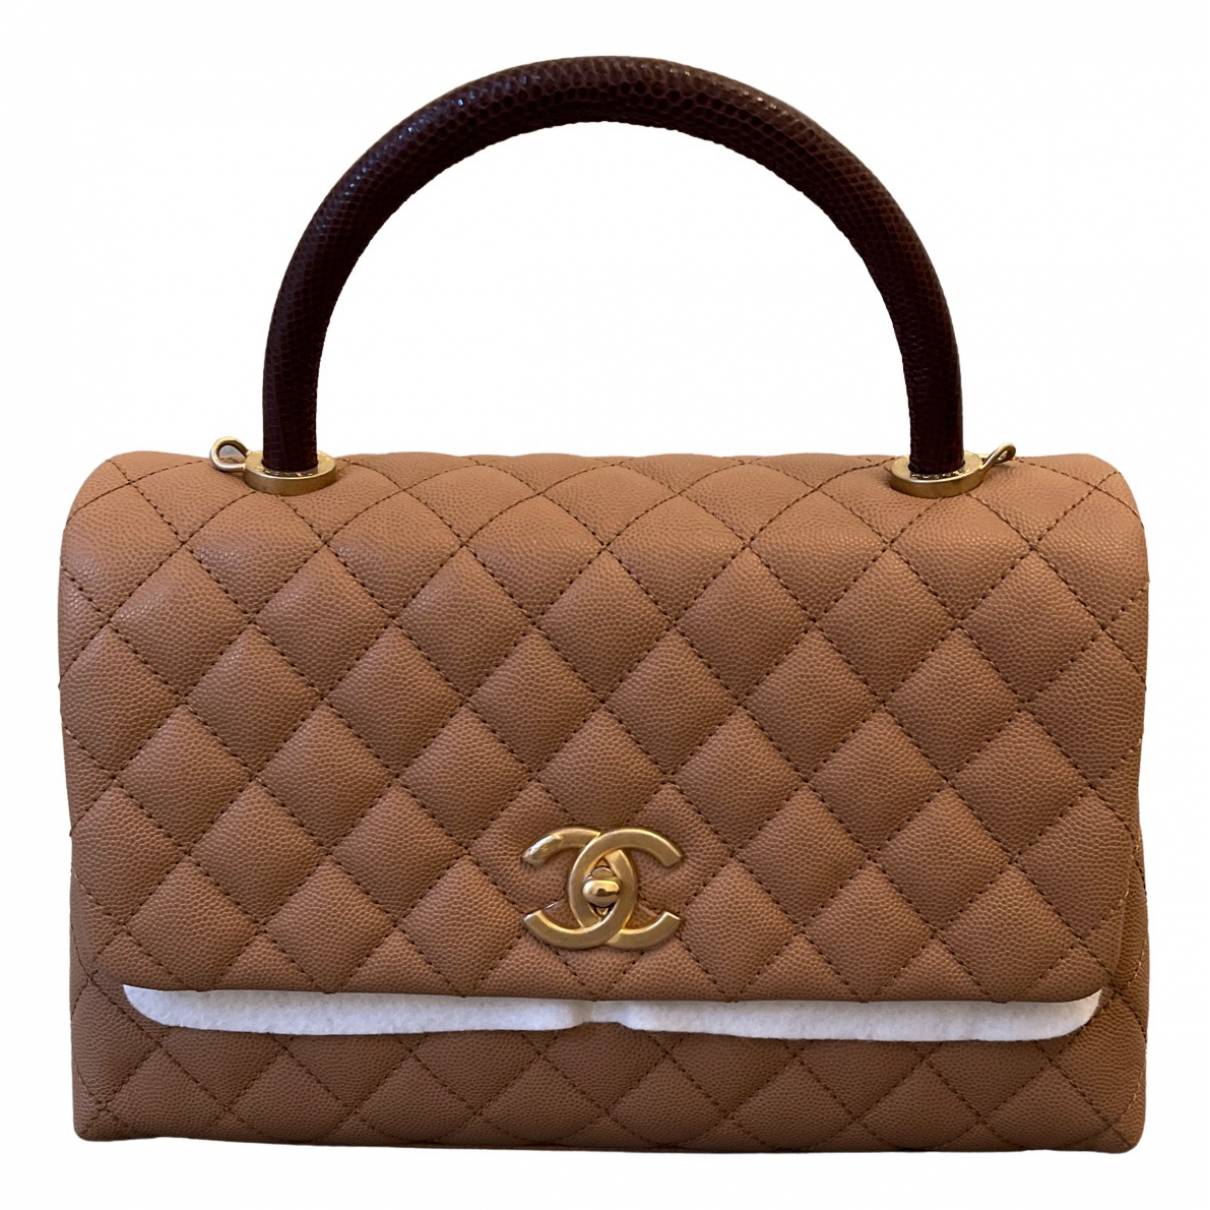 Coco handle leather handbag Chanel Camel in Leather - 19734842